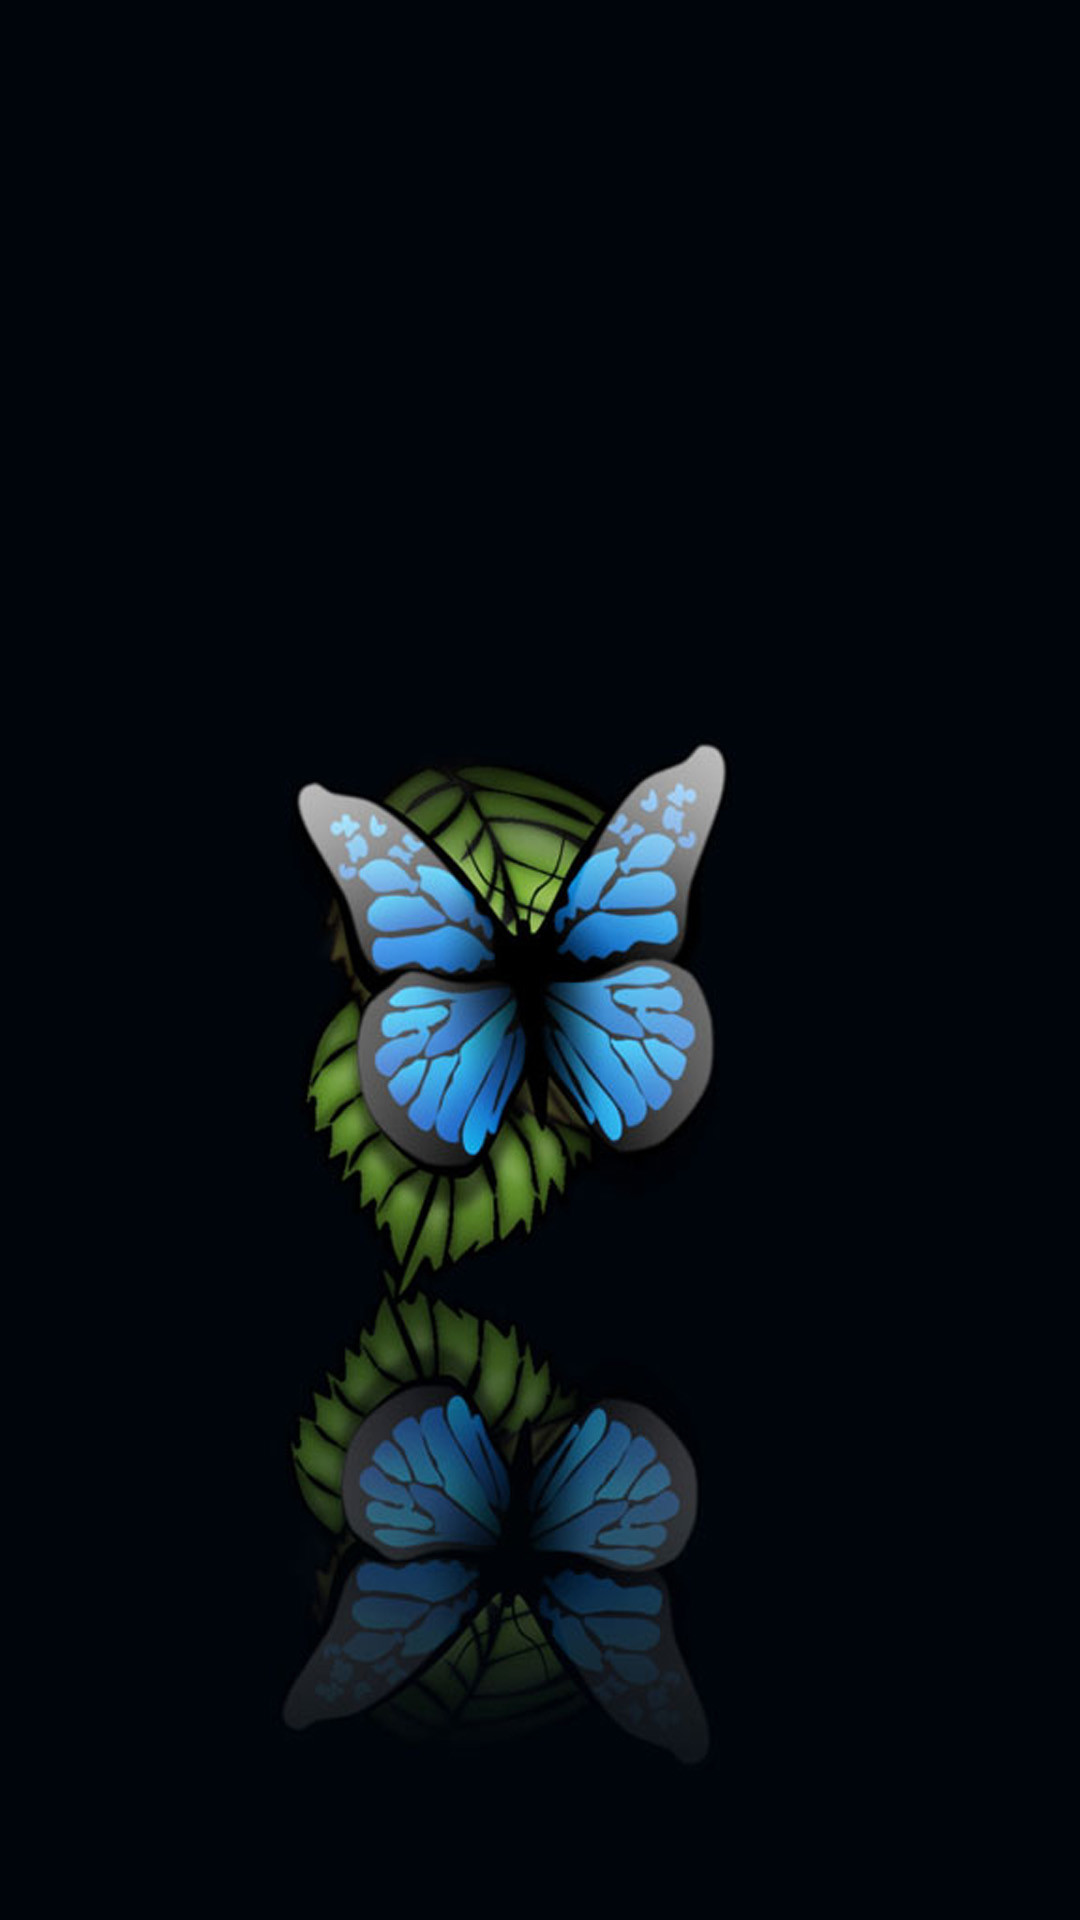 1080x1920 Blue Butterfly Black Background Android Wallpaper ...